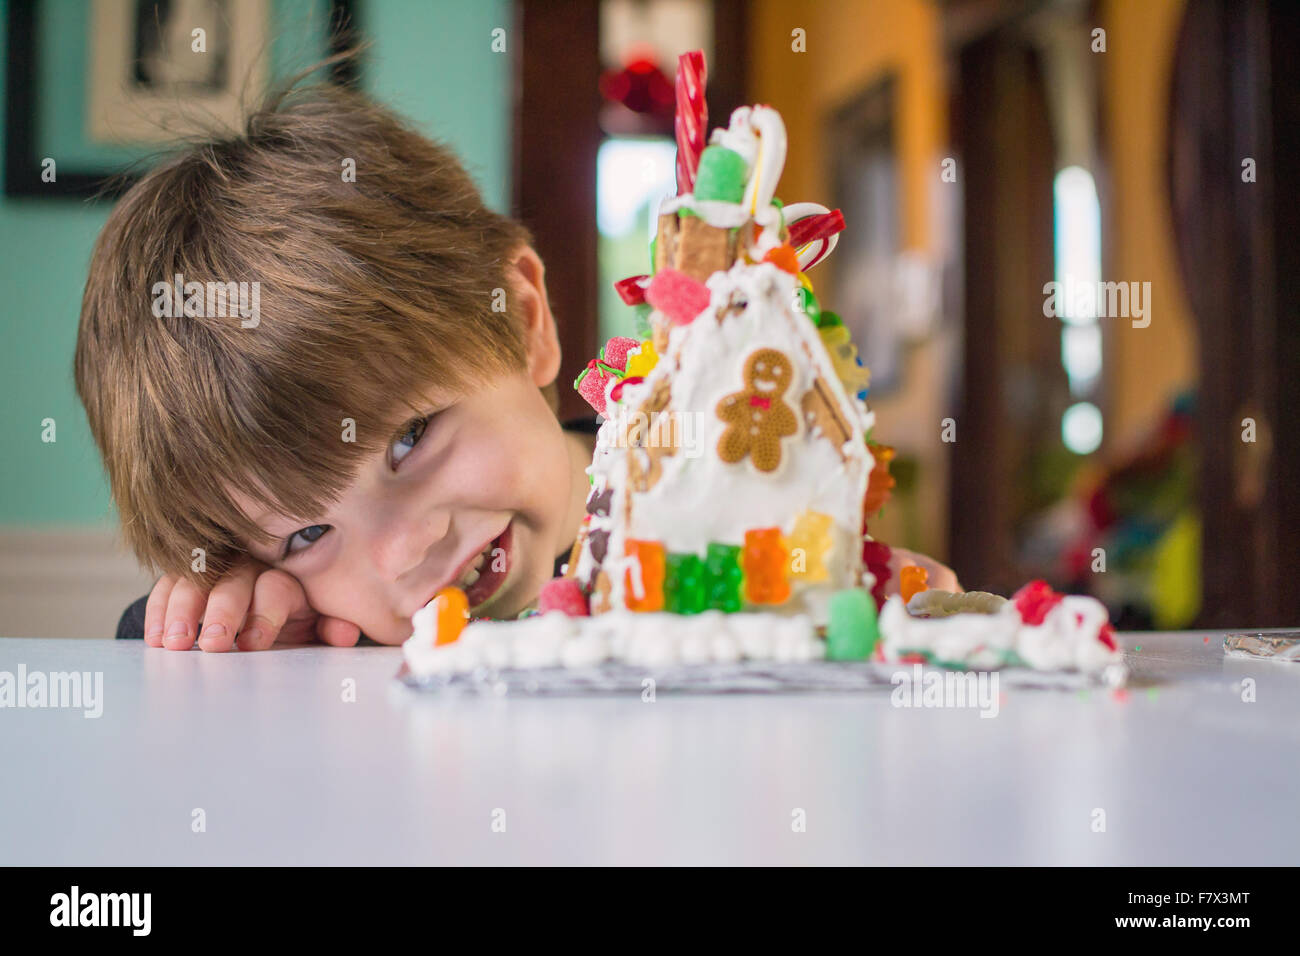 Smiling boy with gingerbread house Banque D'Images